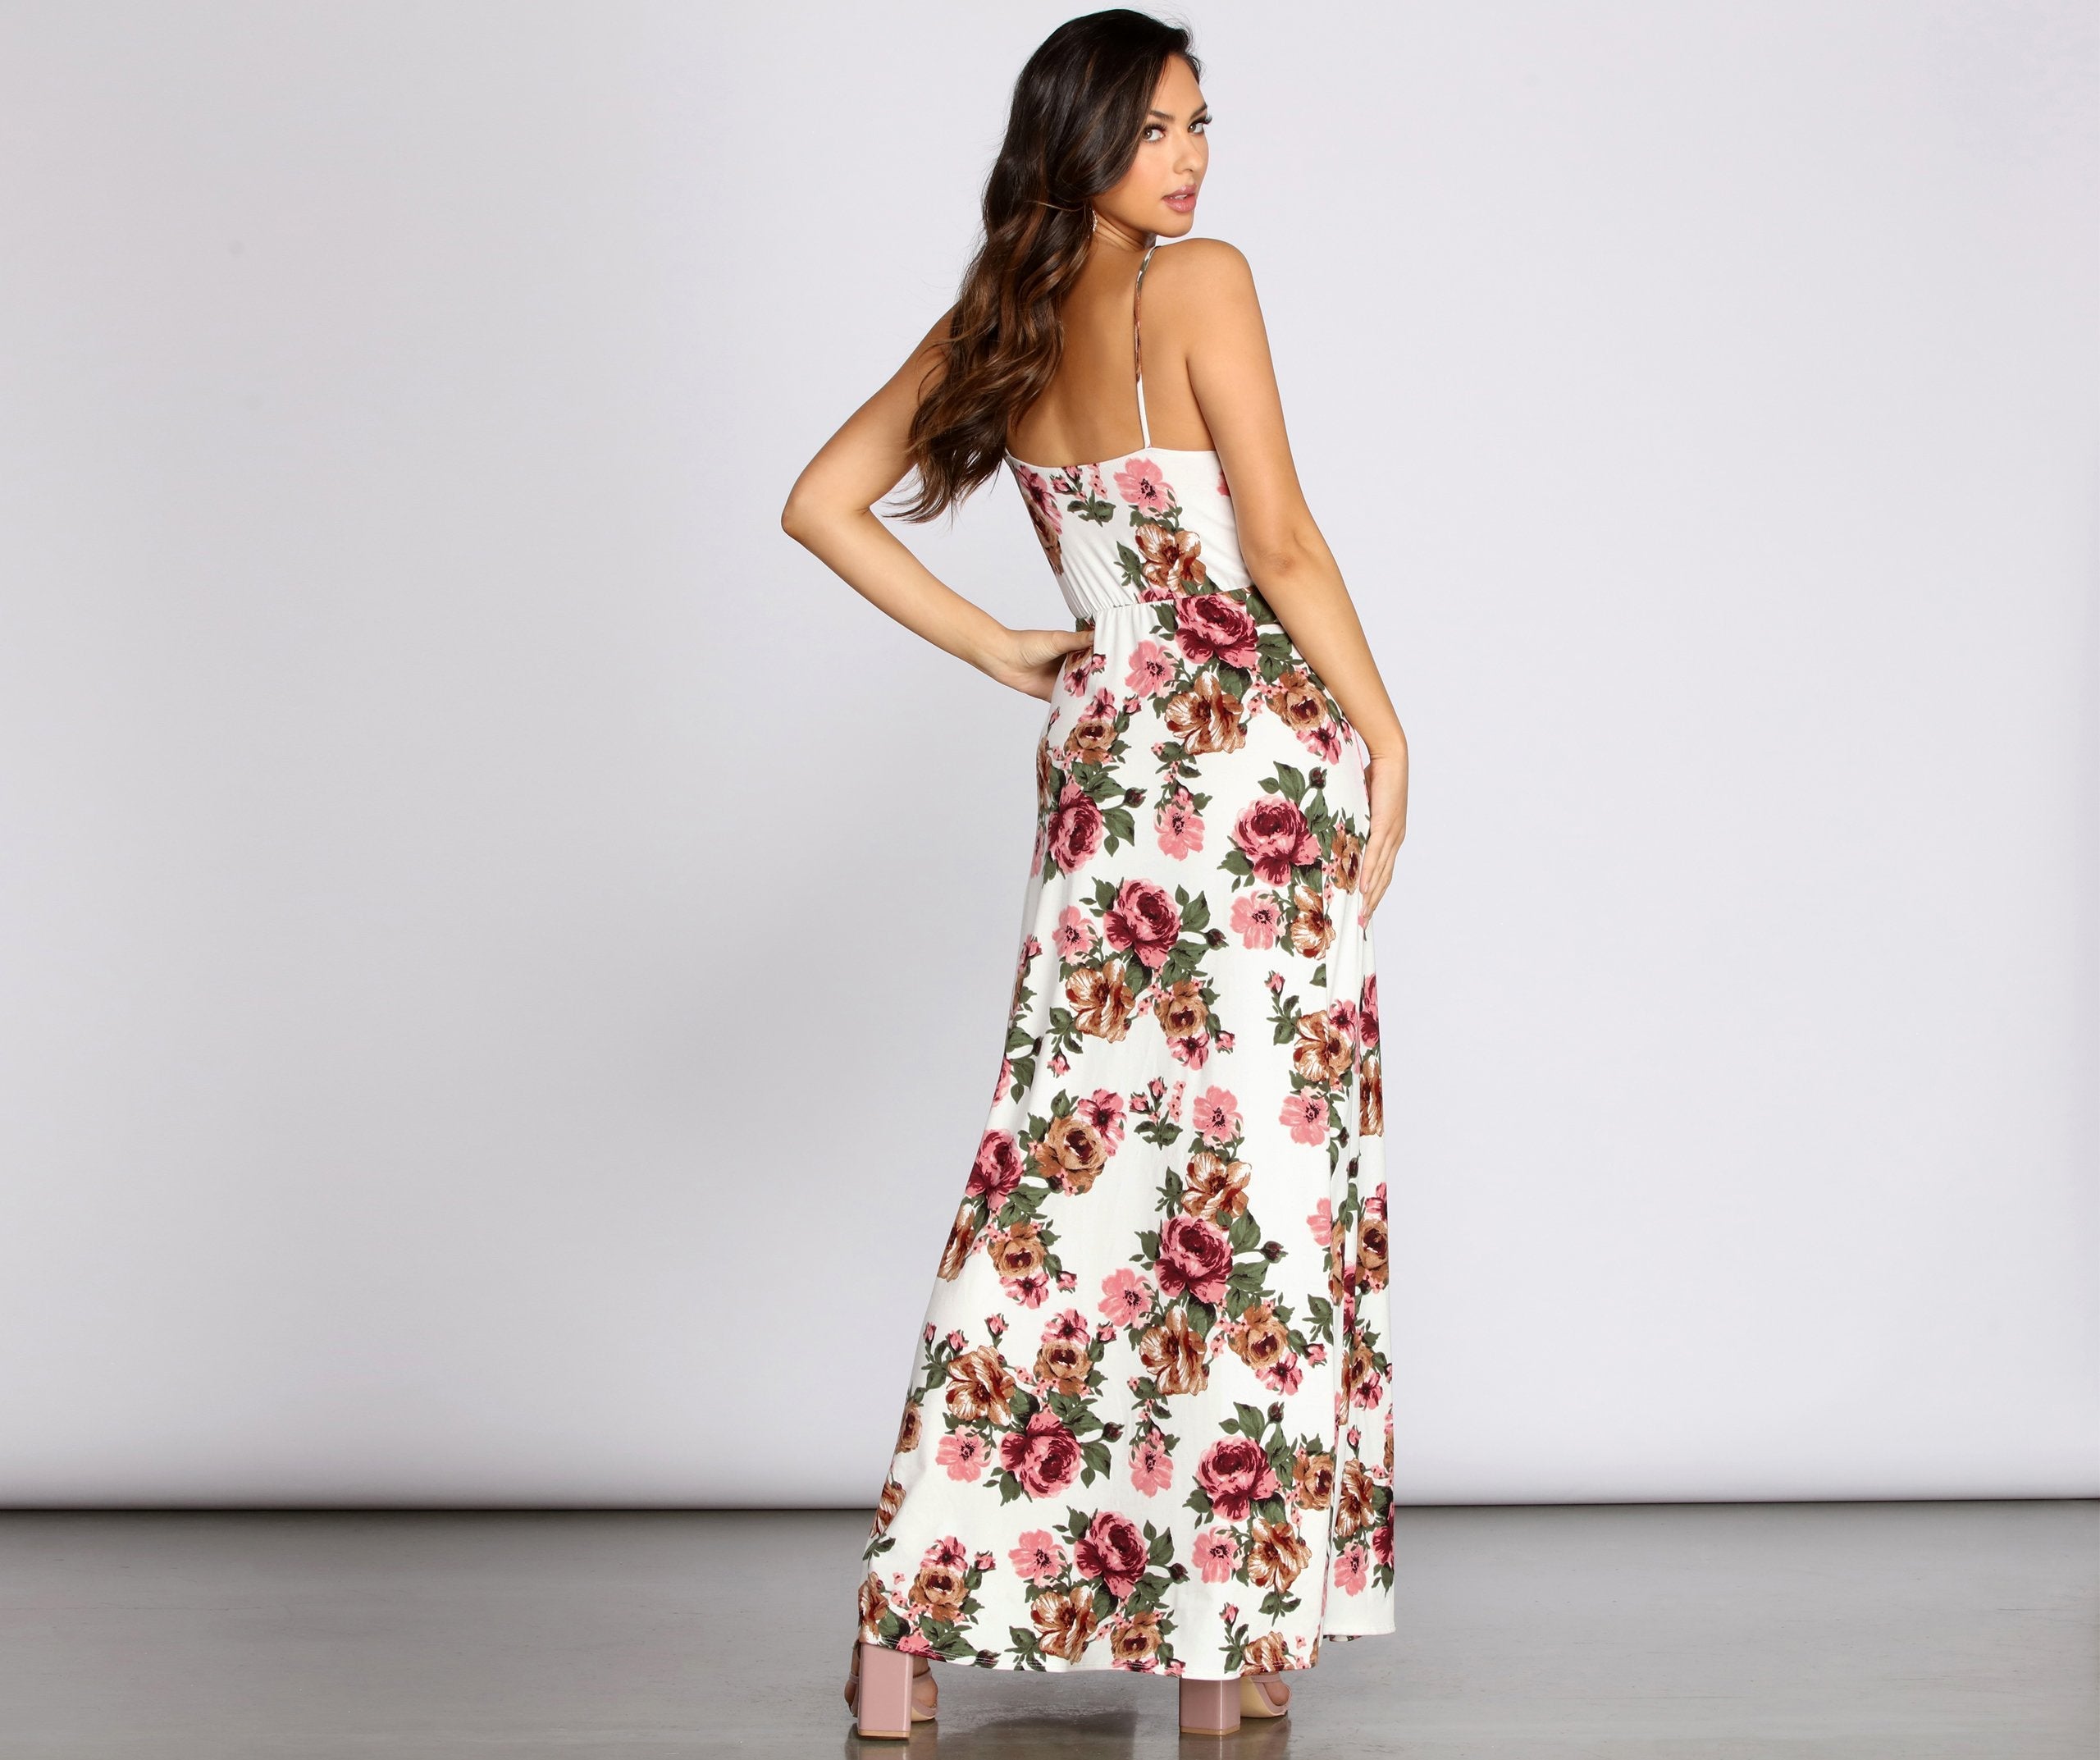 Fab In Floral Brushed Knit Maxi Dress - Lady Occasions